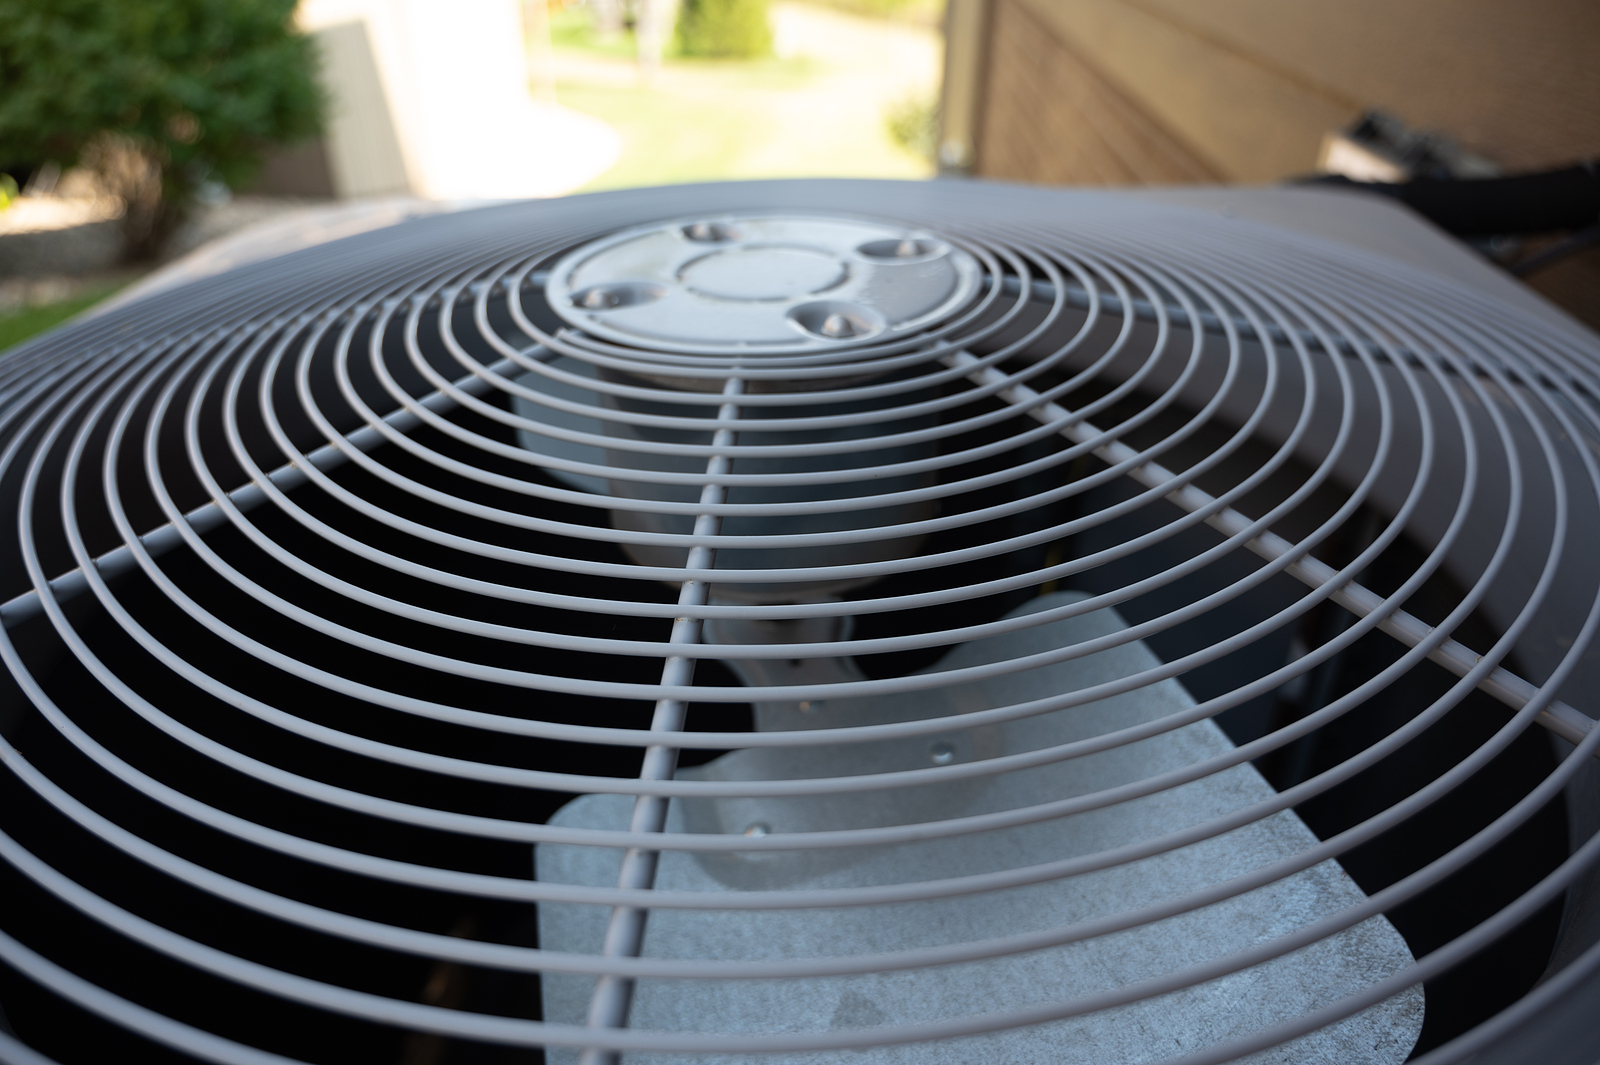 Top View Of Residential Air Conditioning Unit Outdoors With Fan